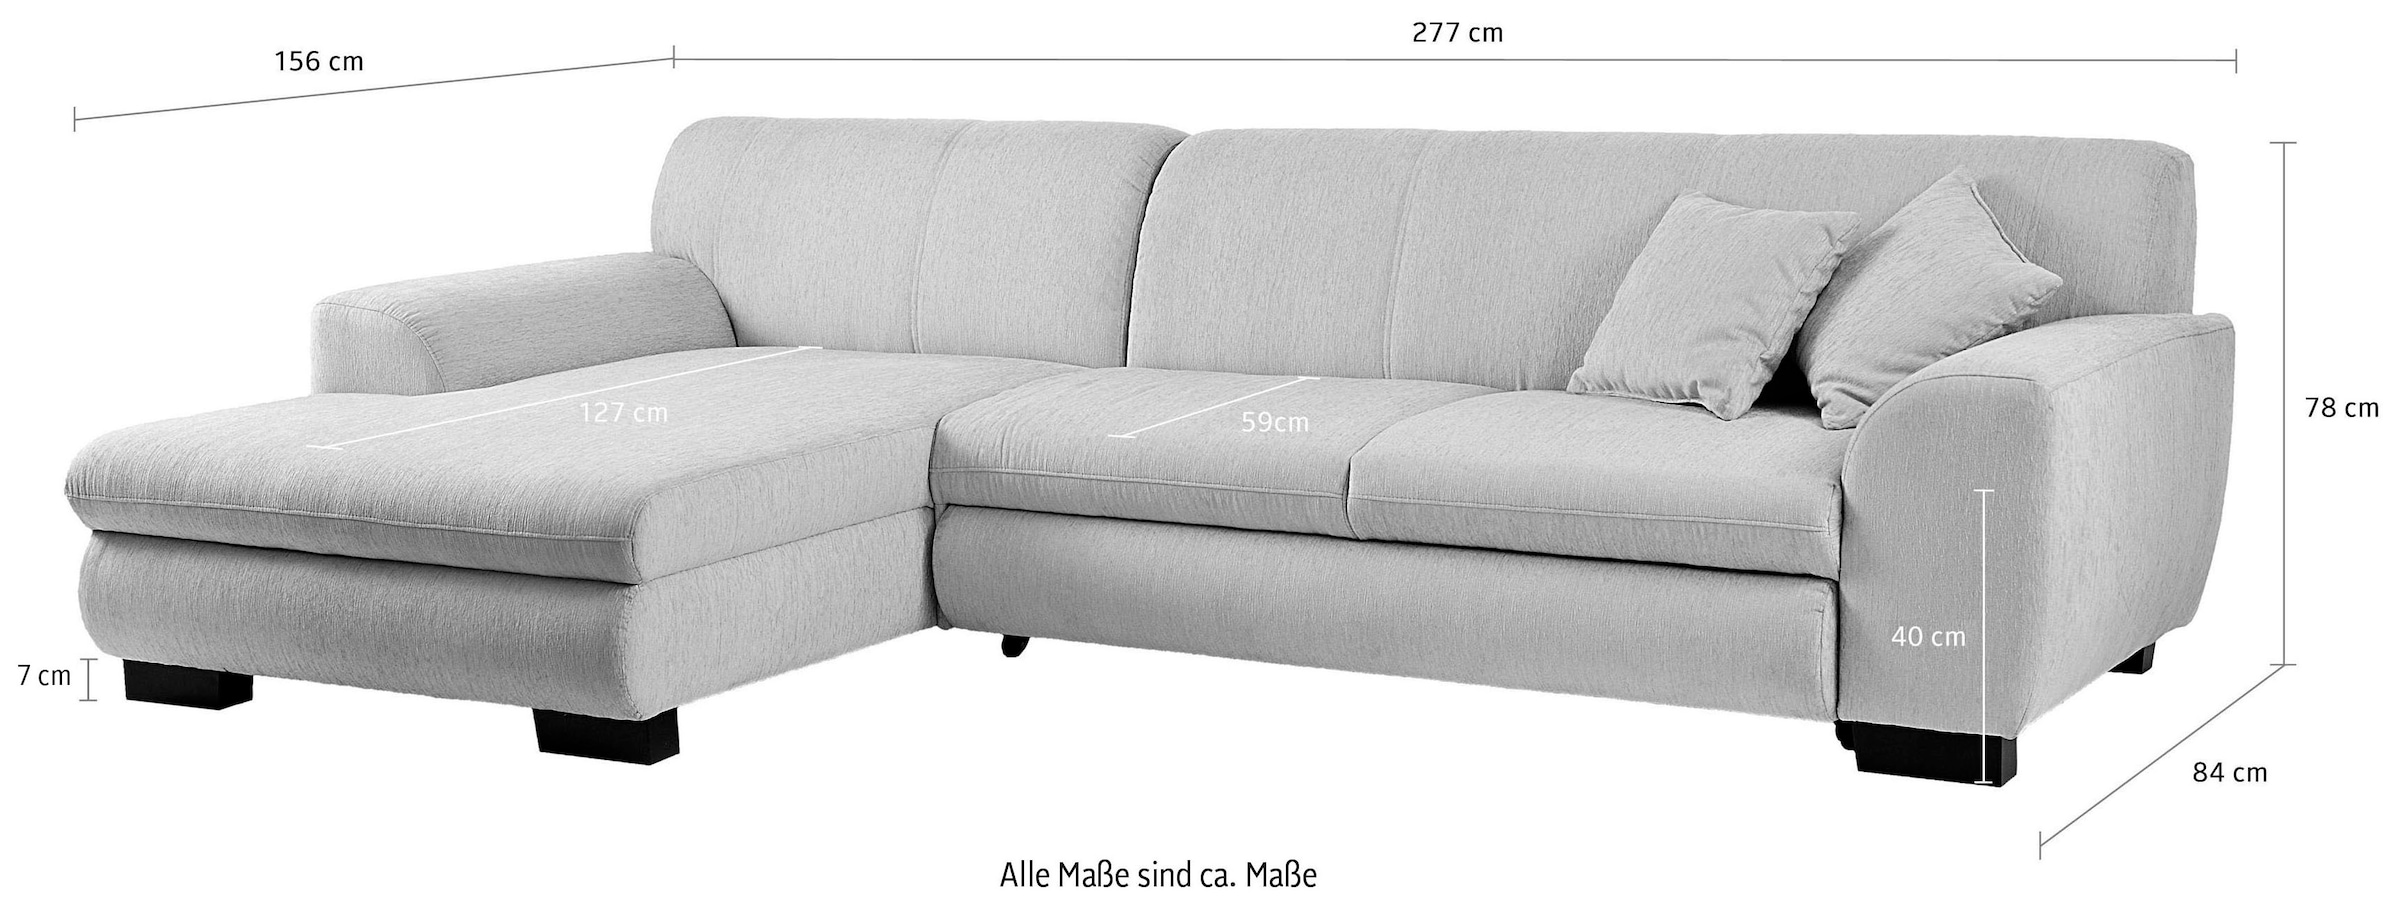 Home affaire Ecksofa »Nika L-Form«, wahlweise mit Bettfunktion, auch in Cord